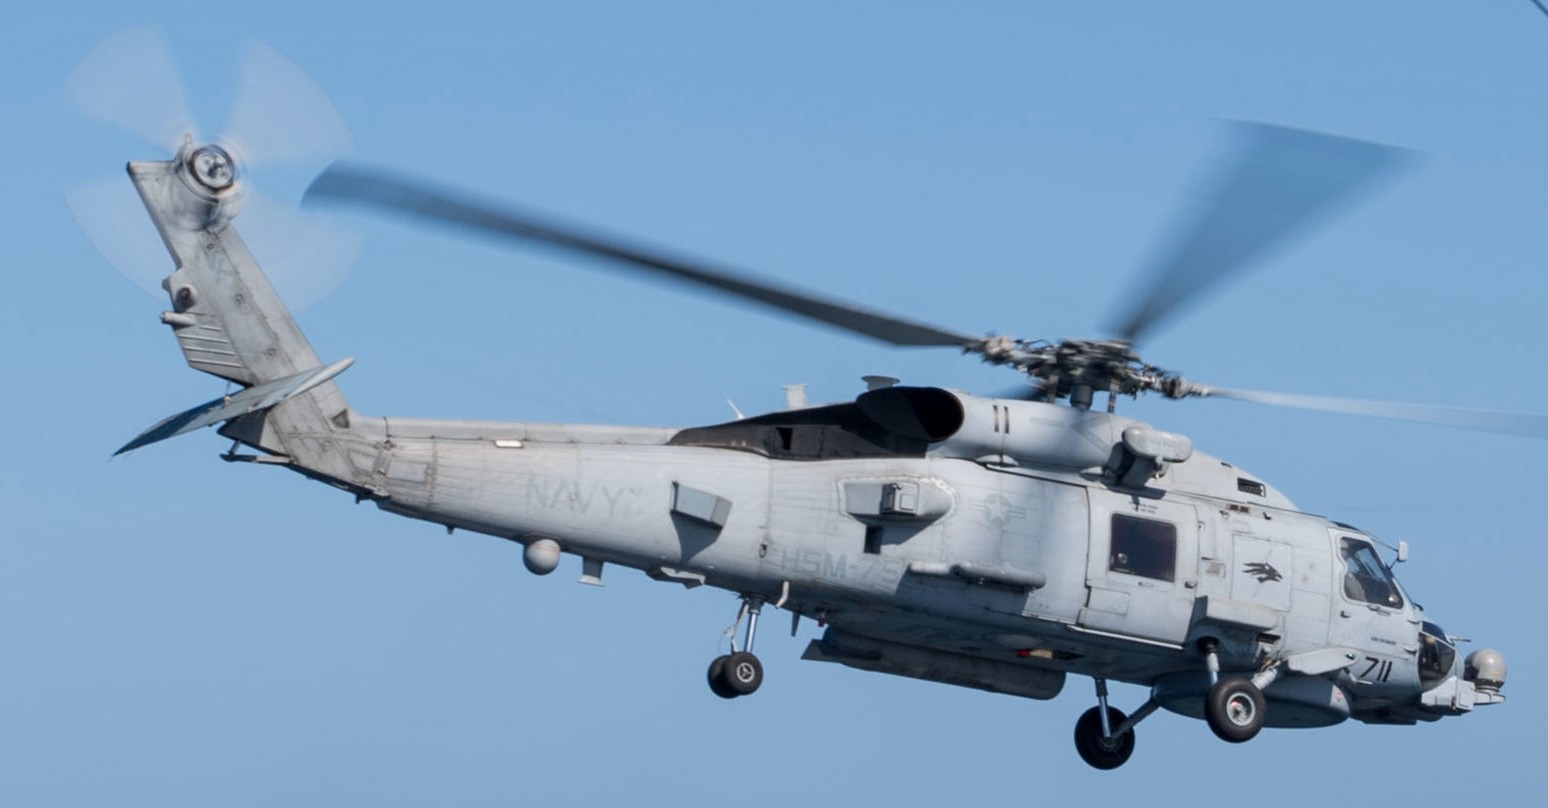 hsm-75 wolfpack helicopter maritime strike squadron us navy mh-60r seahawk 2017 38